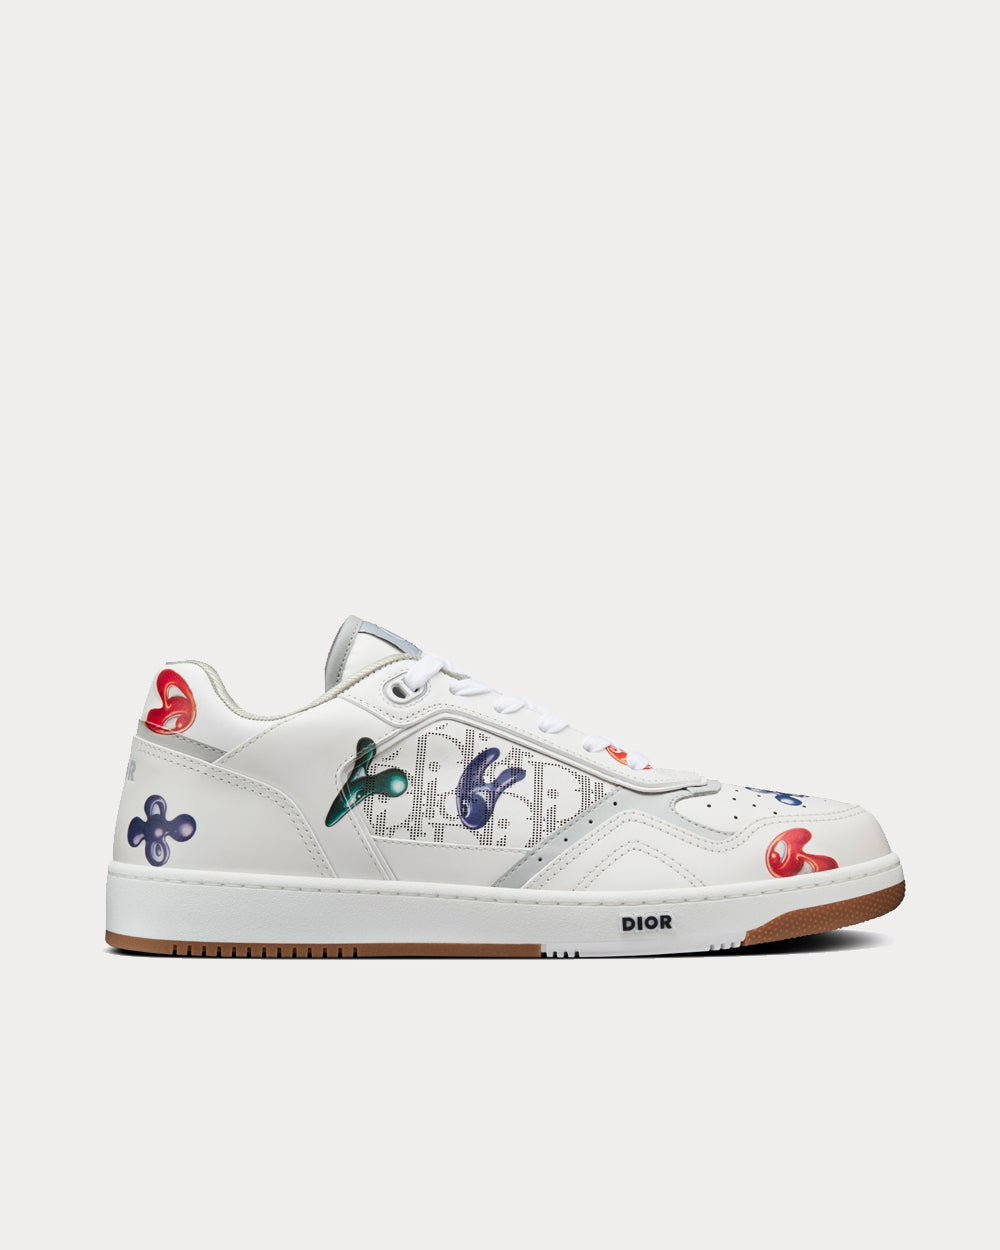 Dior x Kenny Scharf - B27 White Smooth Calfskin with Printed Motif Low Top Sneakers